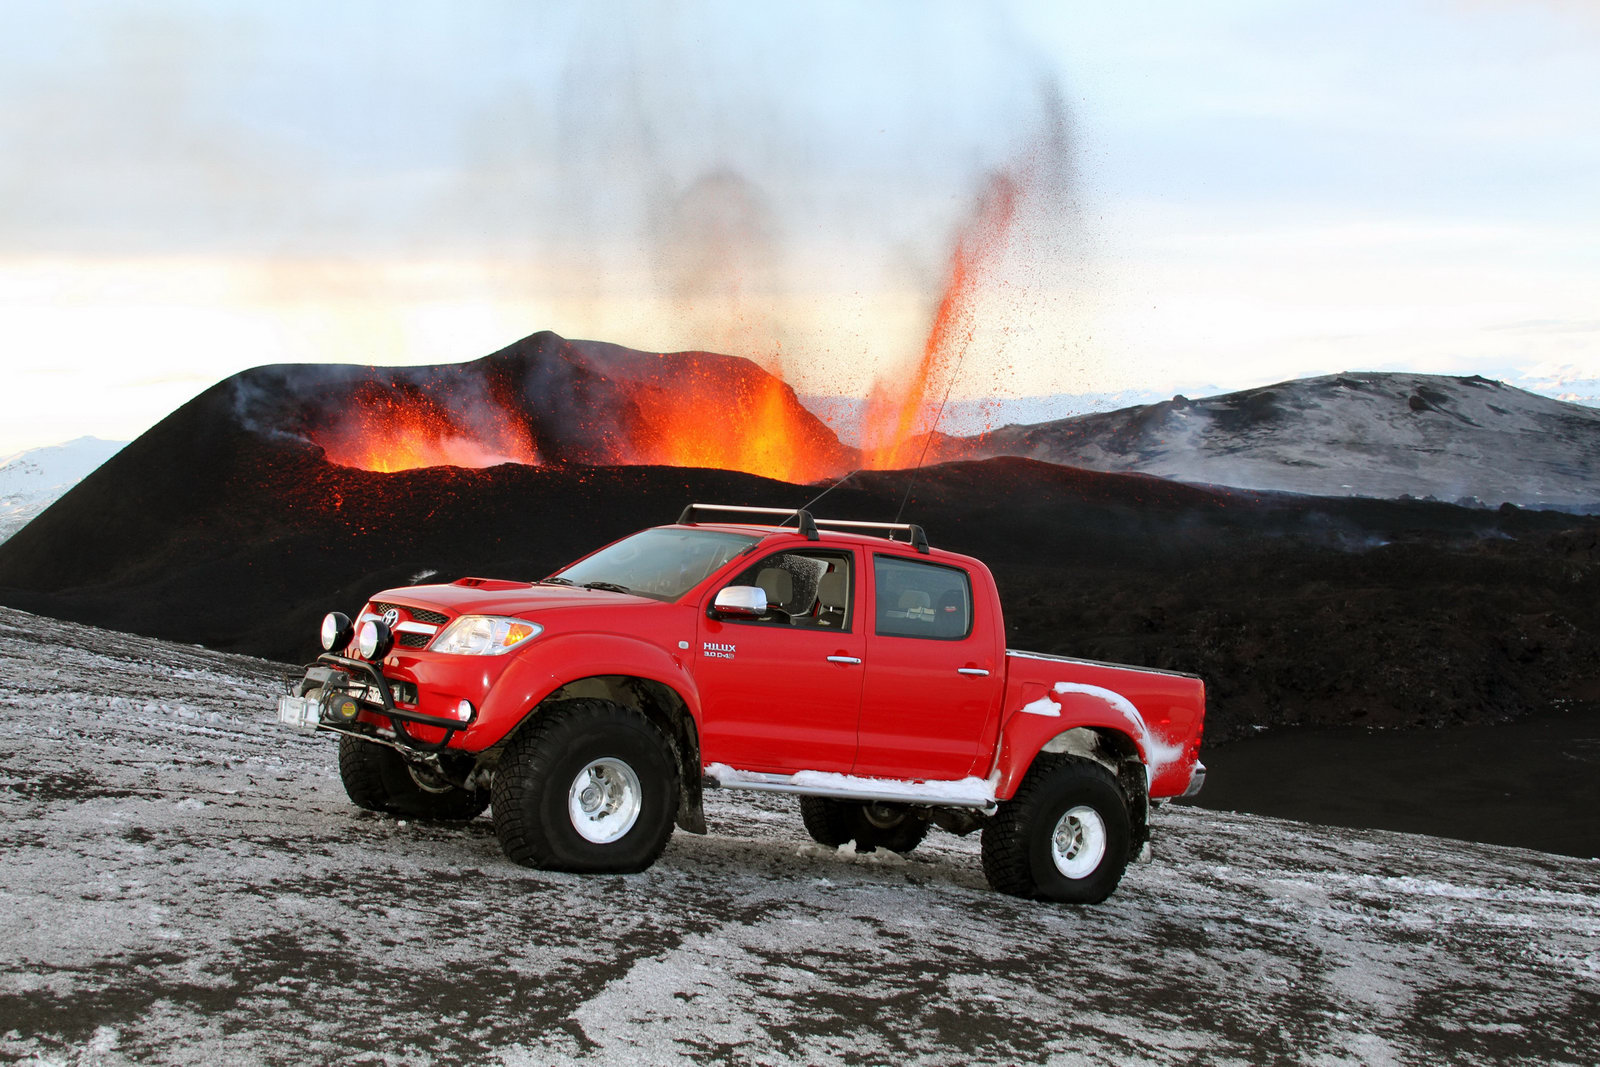 prominent upgrade Toyota Hilux were low, the giant 38-inch tires.via